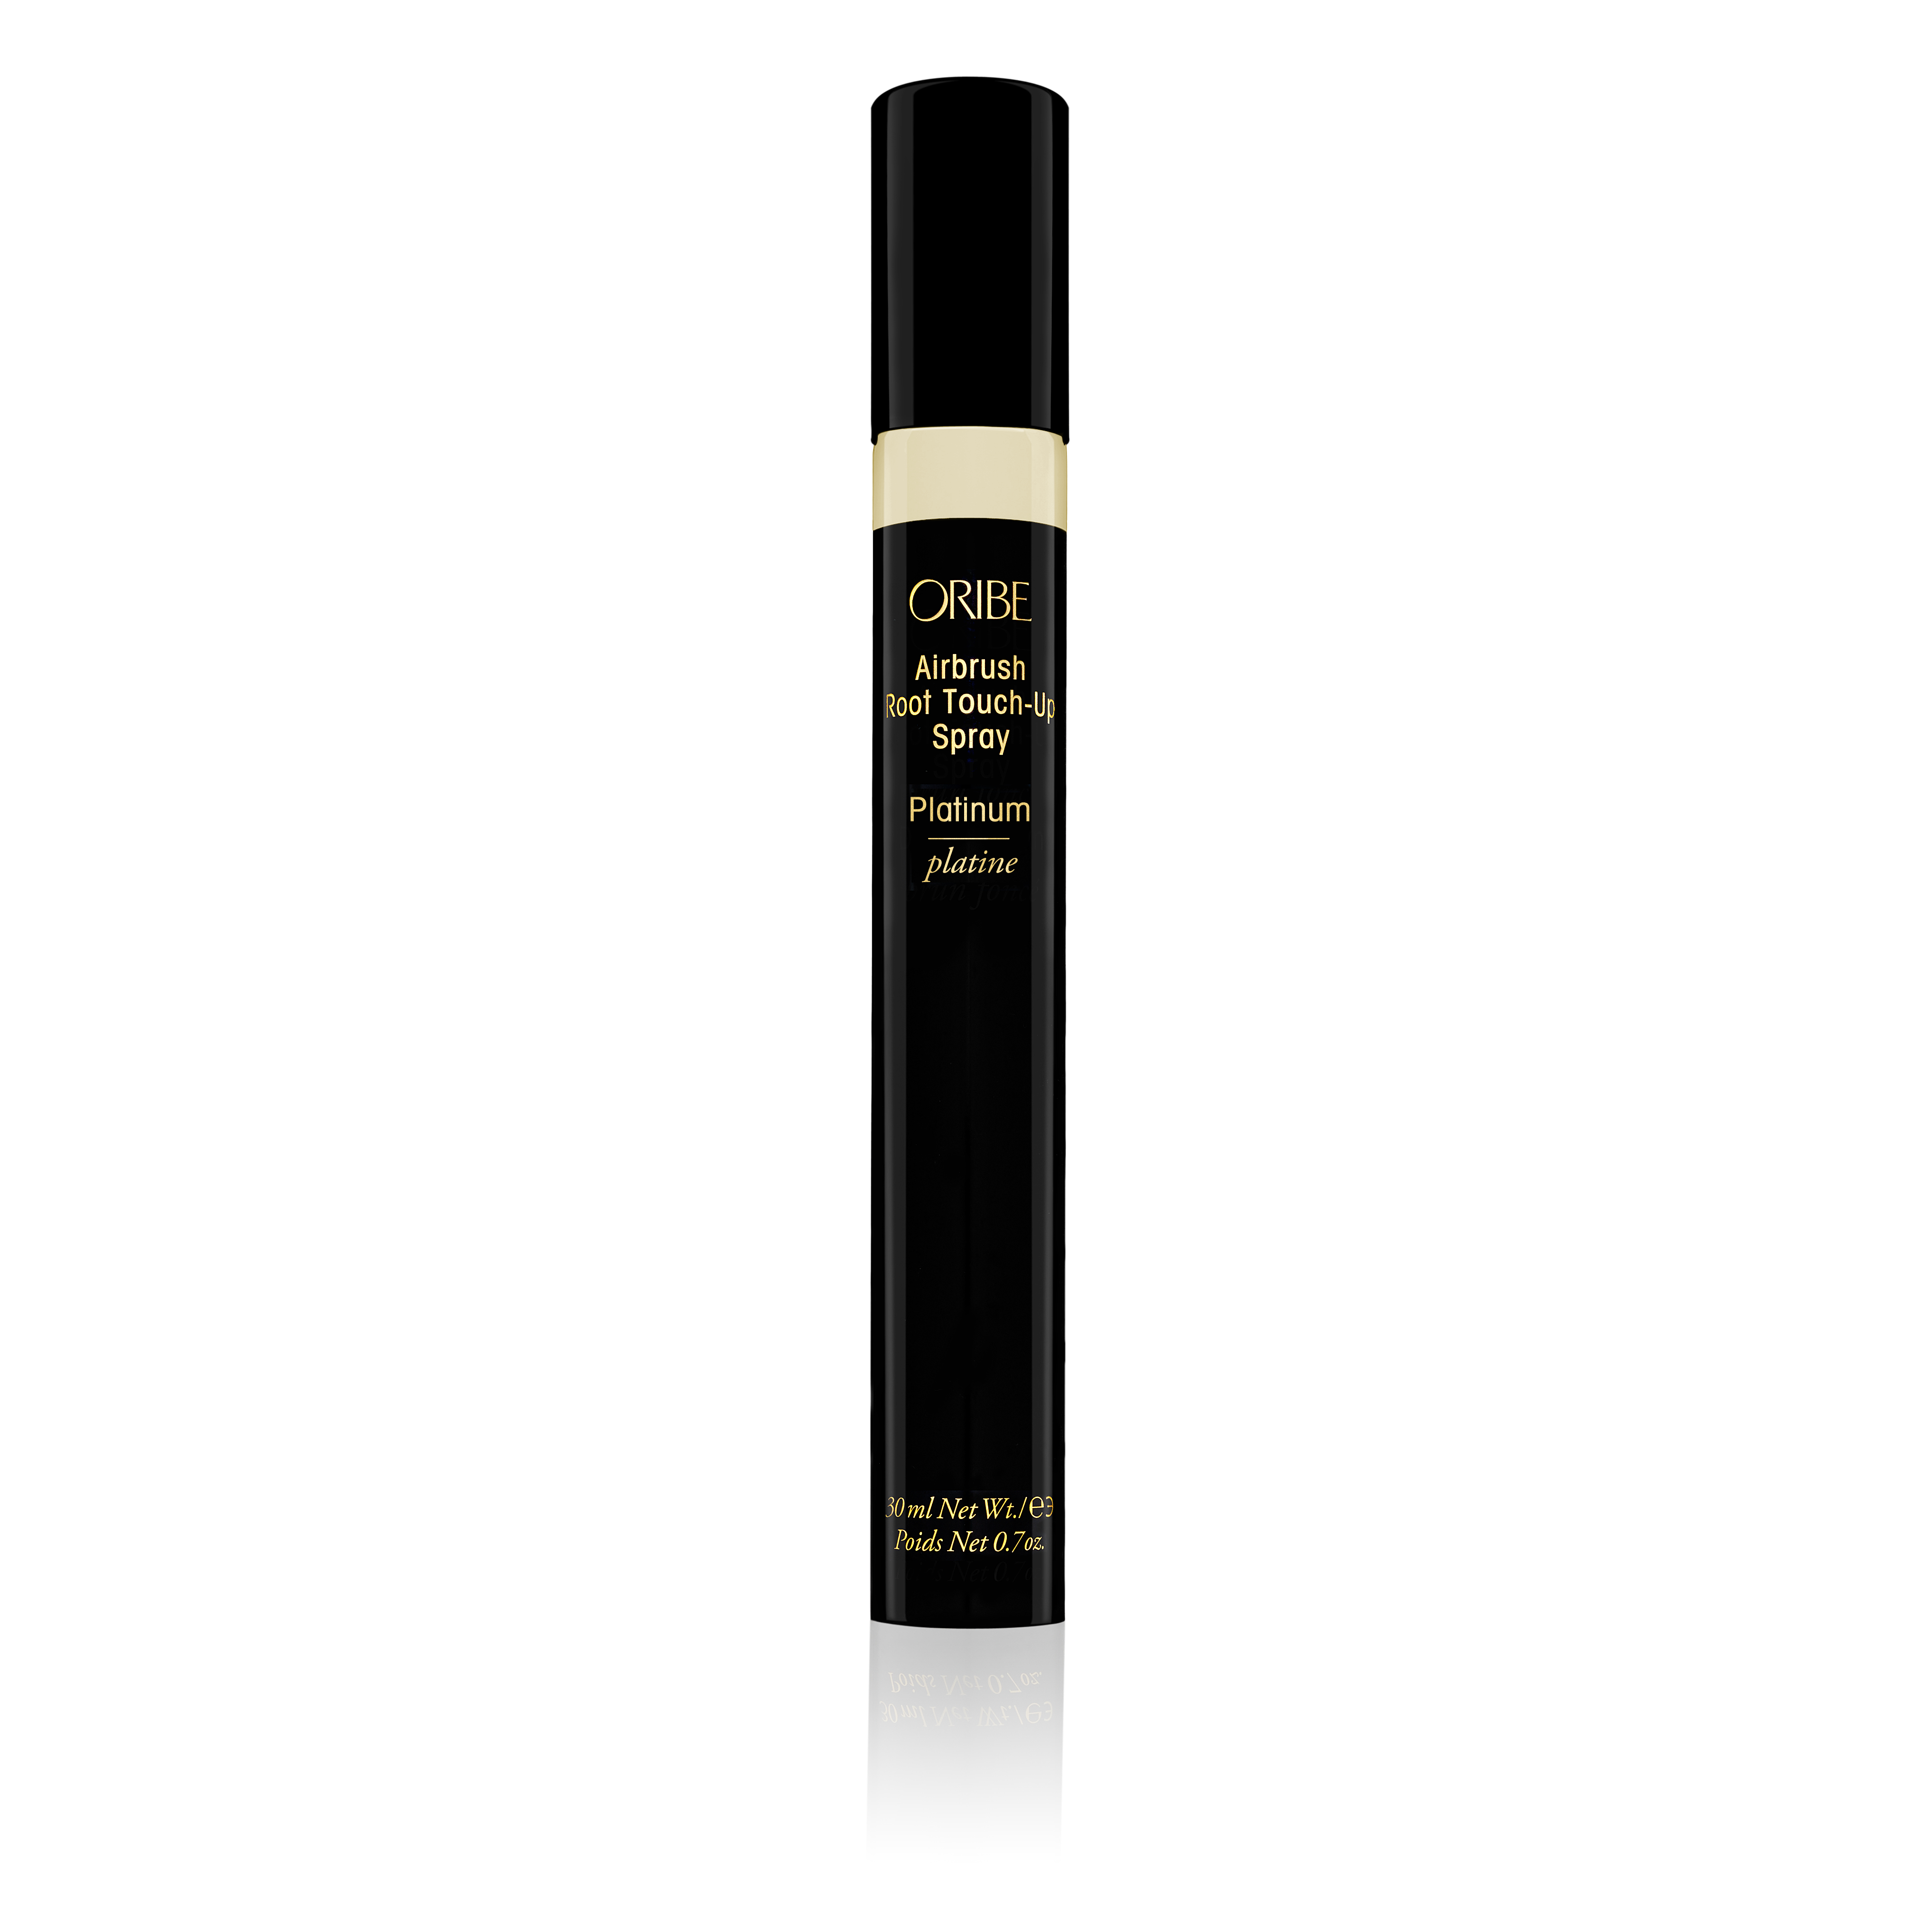 Airbrush Root Touch-Up Spray by Oribe - Platinum